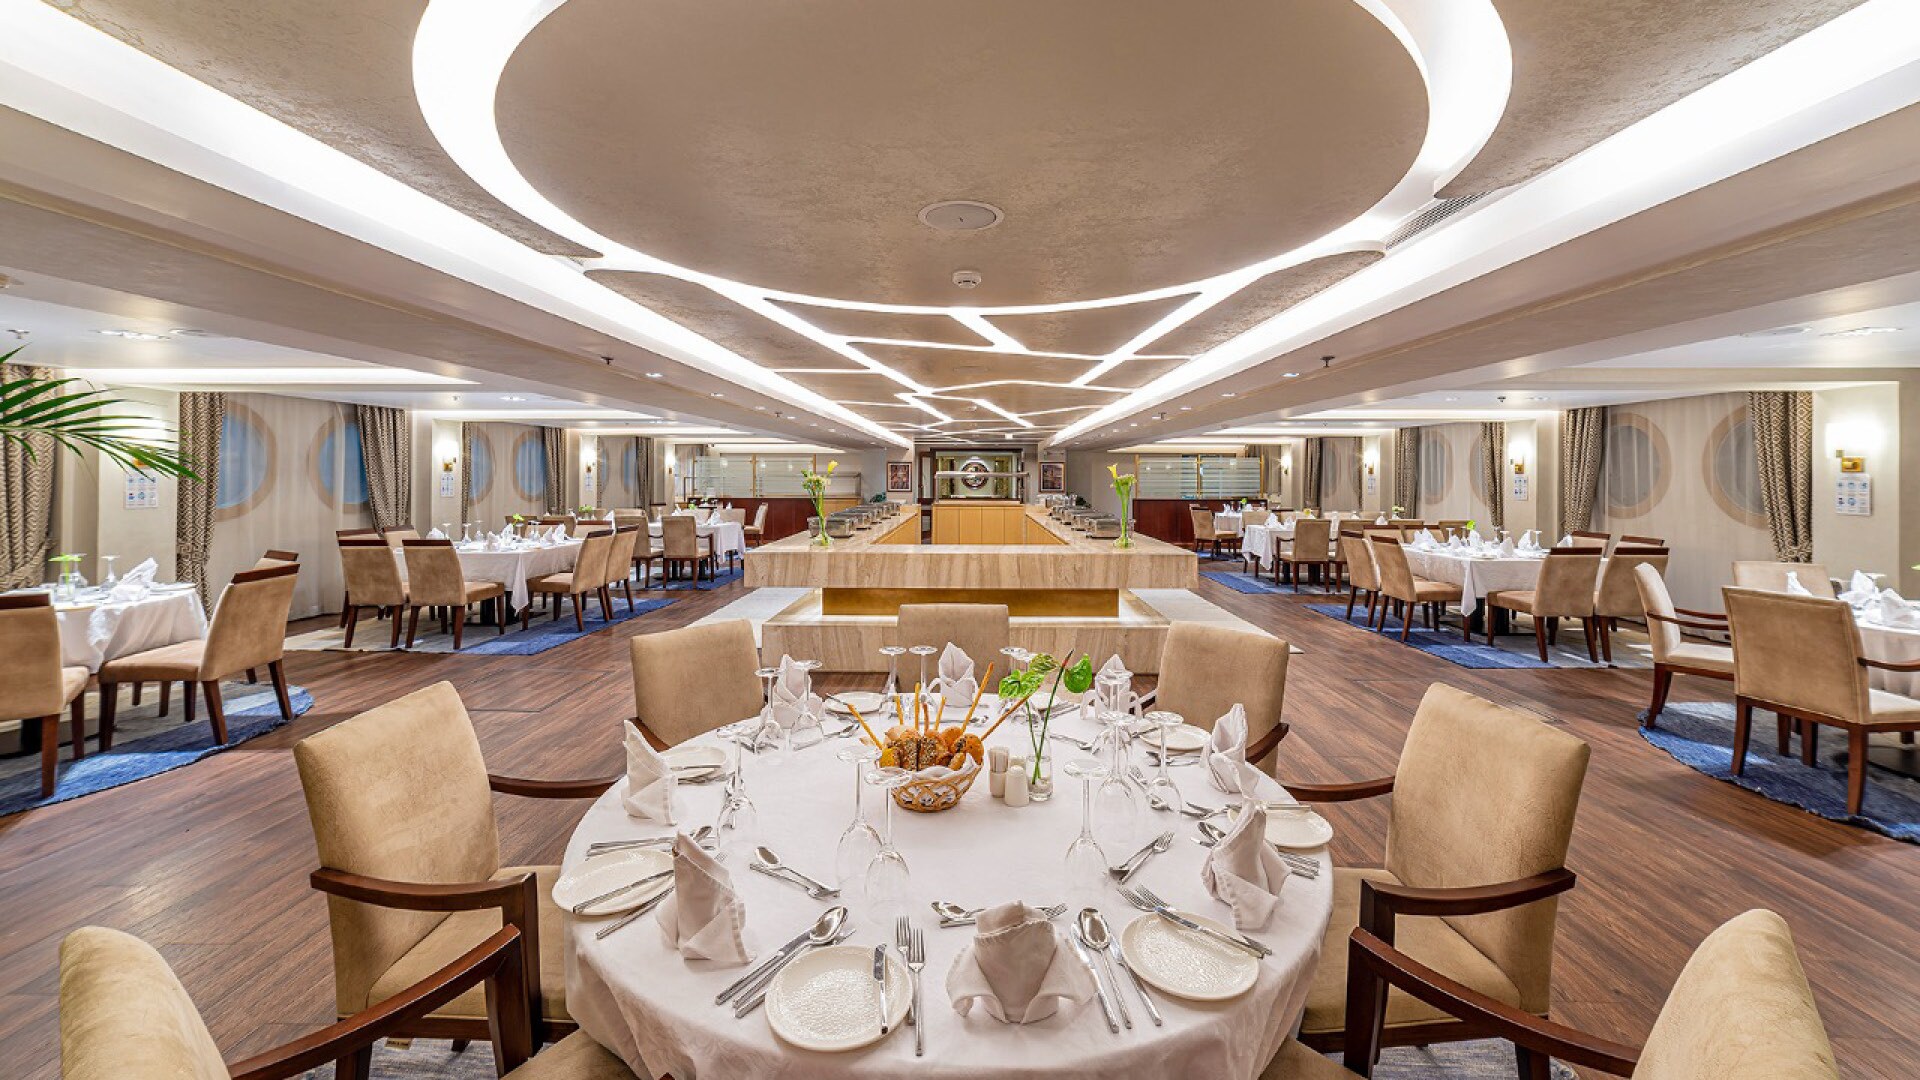 Round table and chairs in the dining area of the MS Sun Goddess